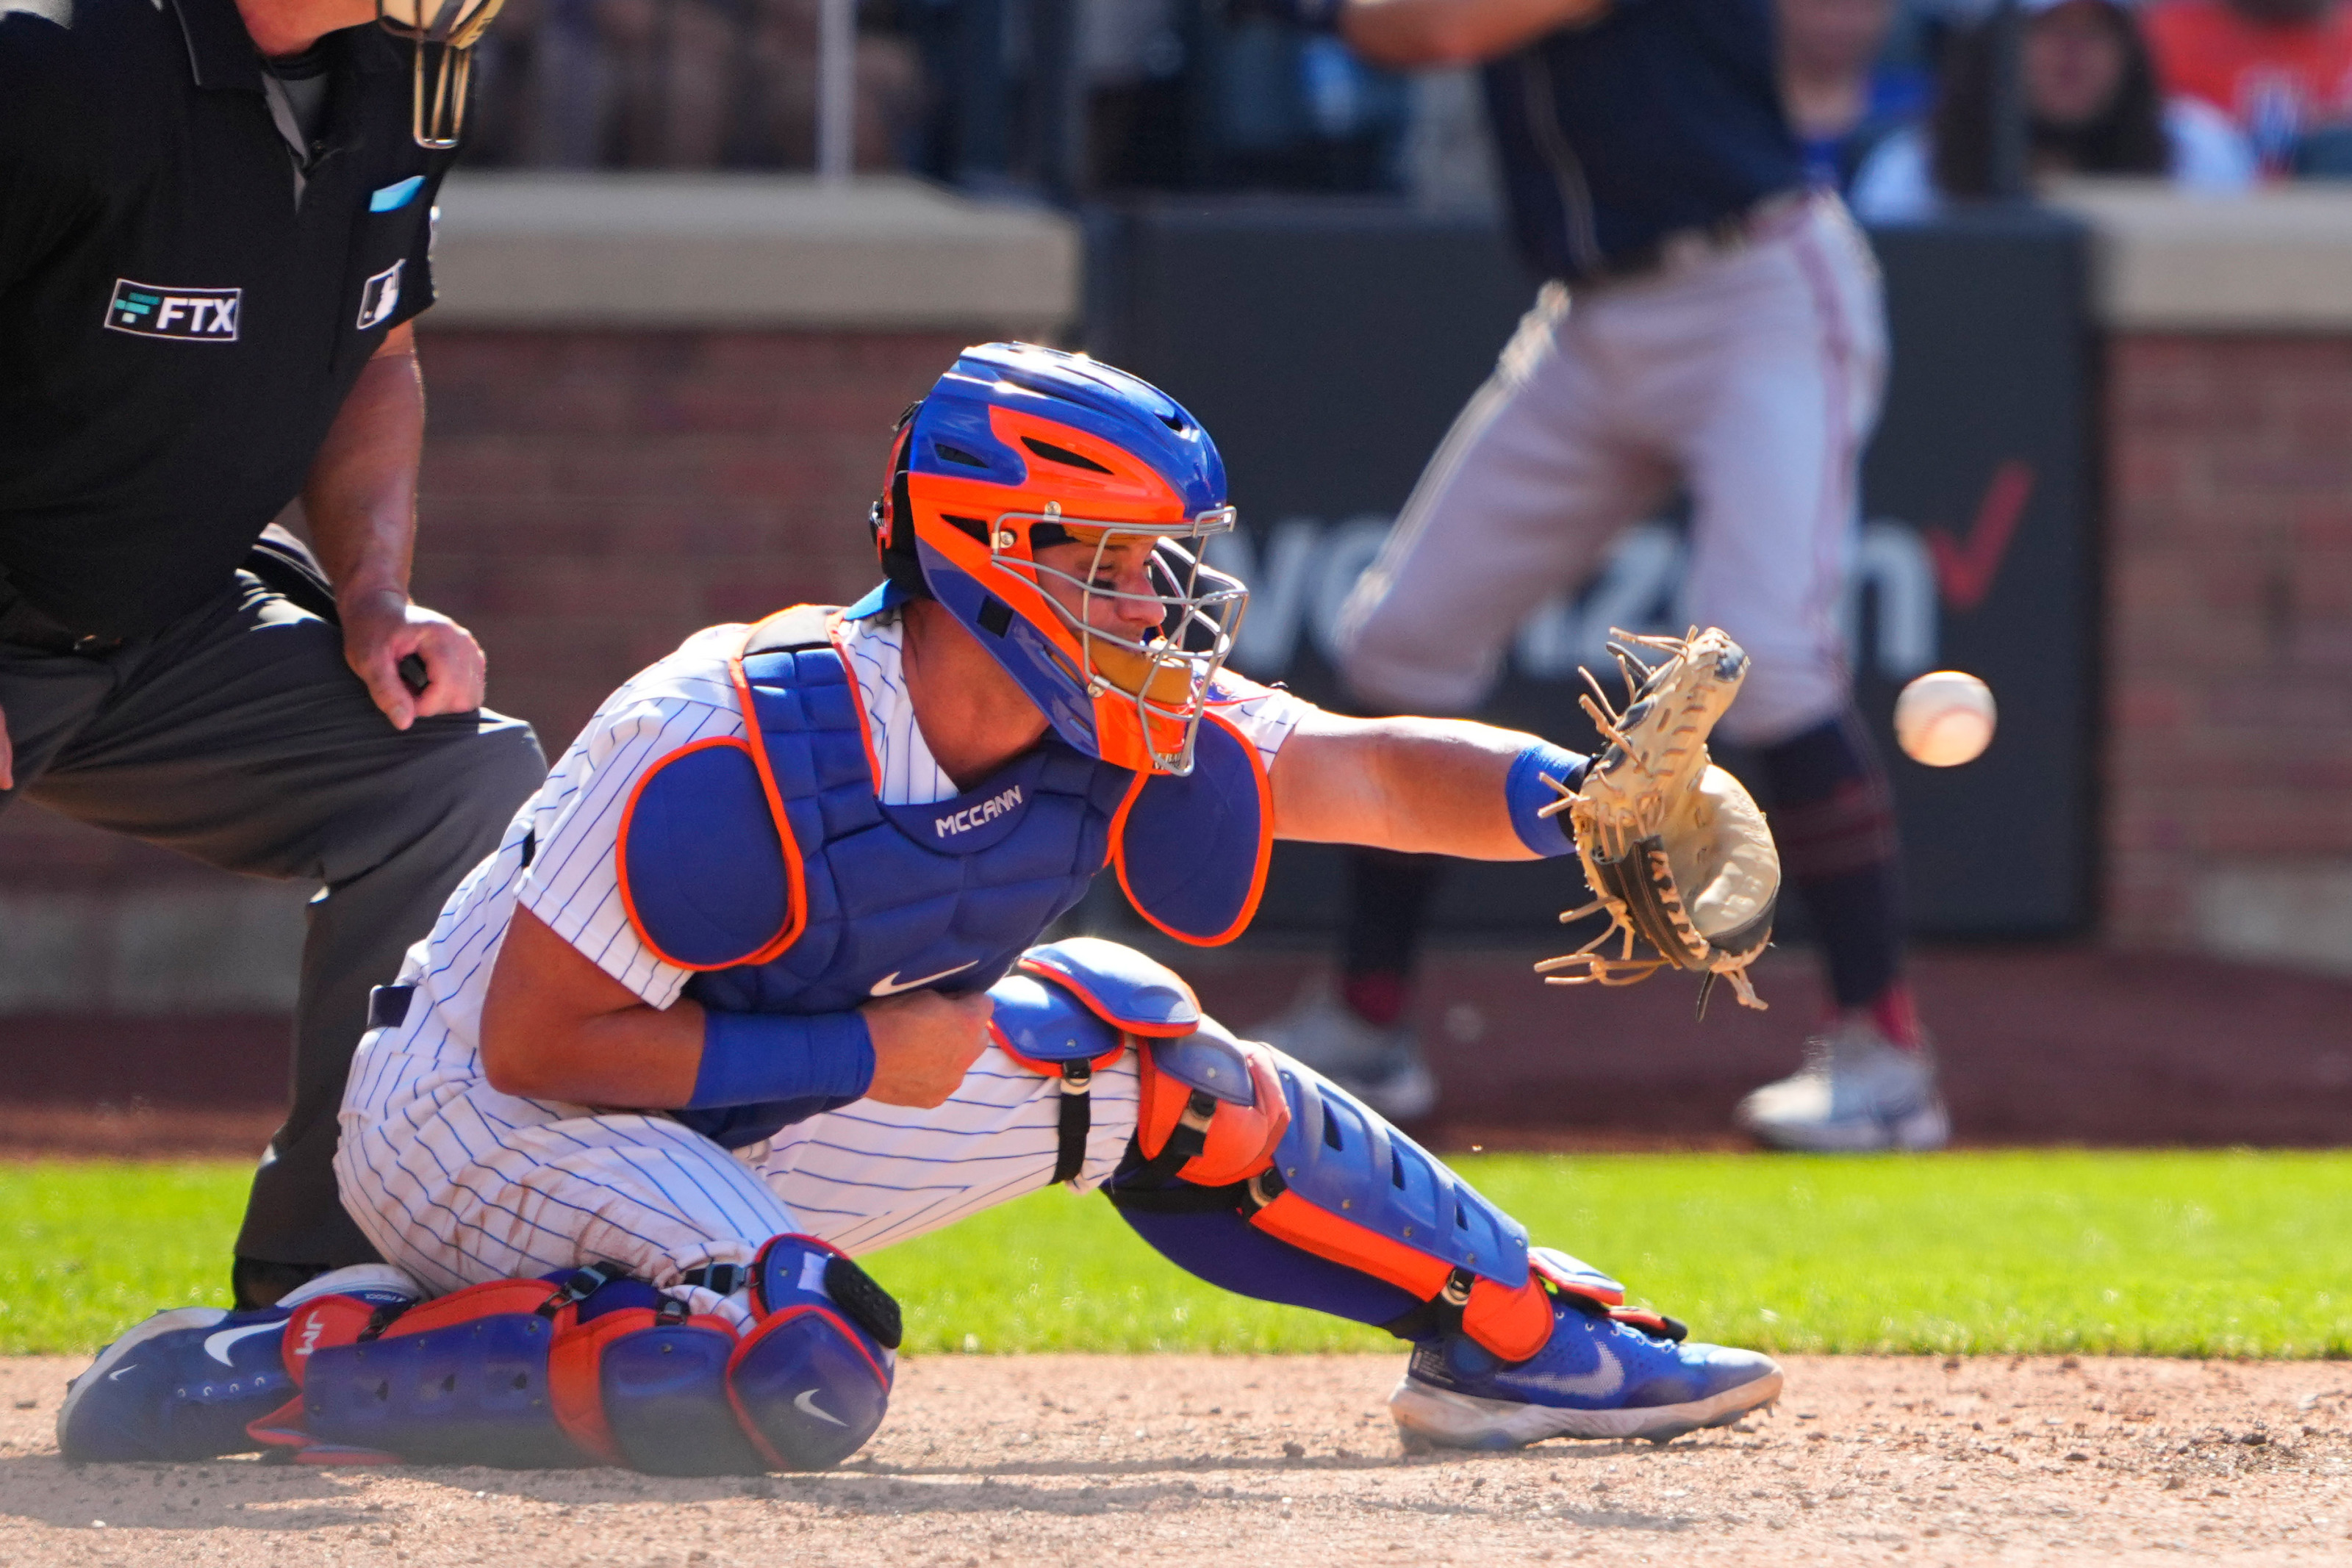 New York Mets catcher James McCann during an instrasquad game at